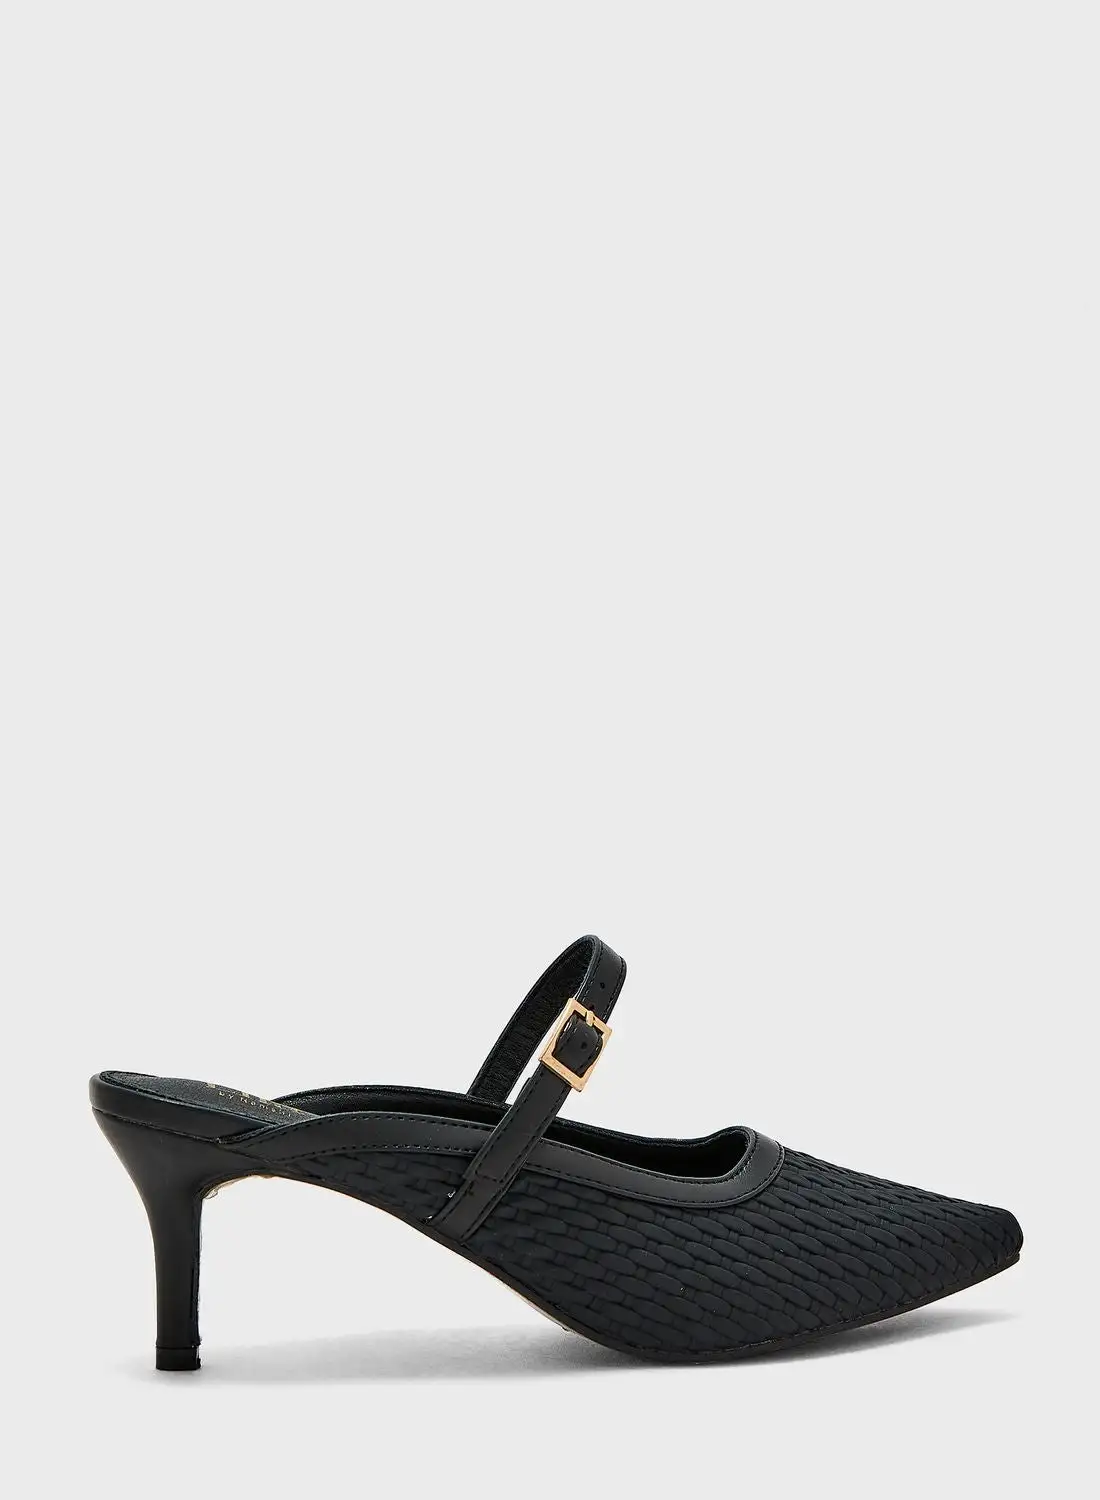 ELLA Structured Pointed Heeled Mule